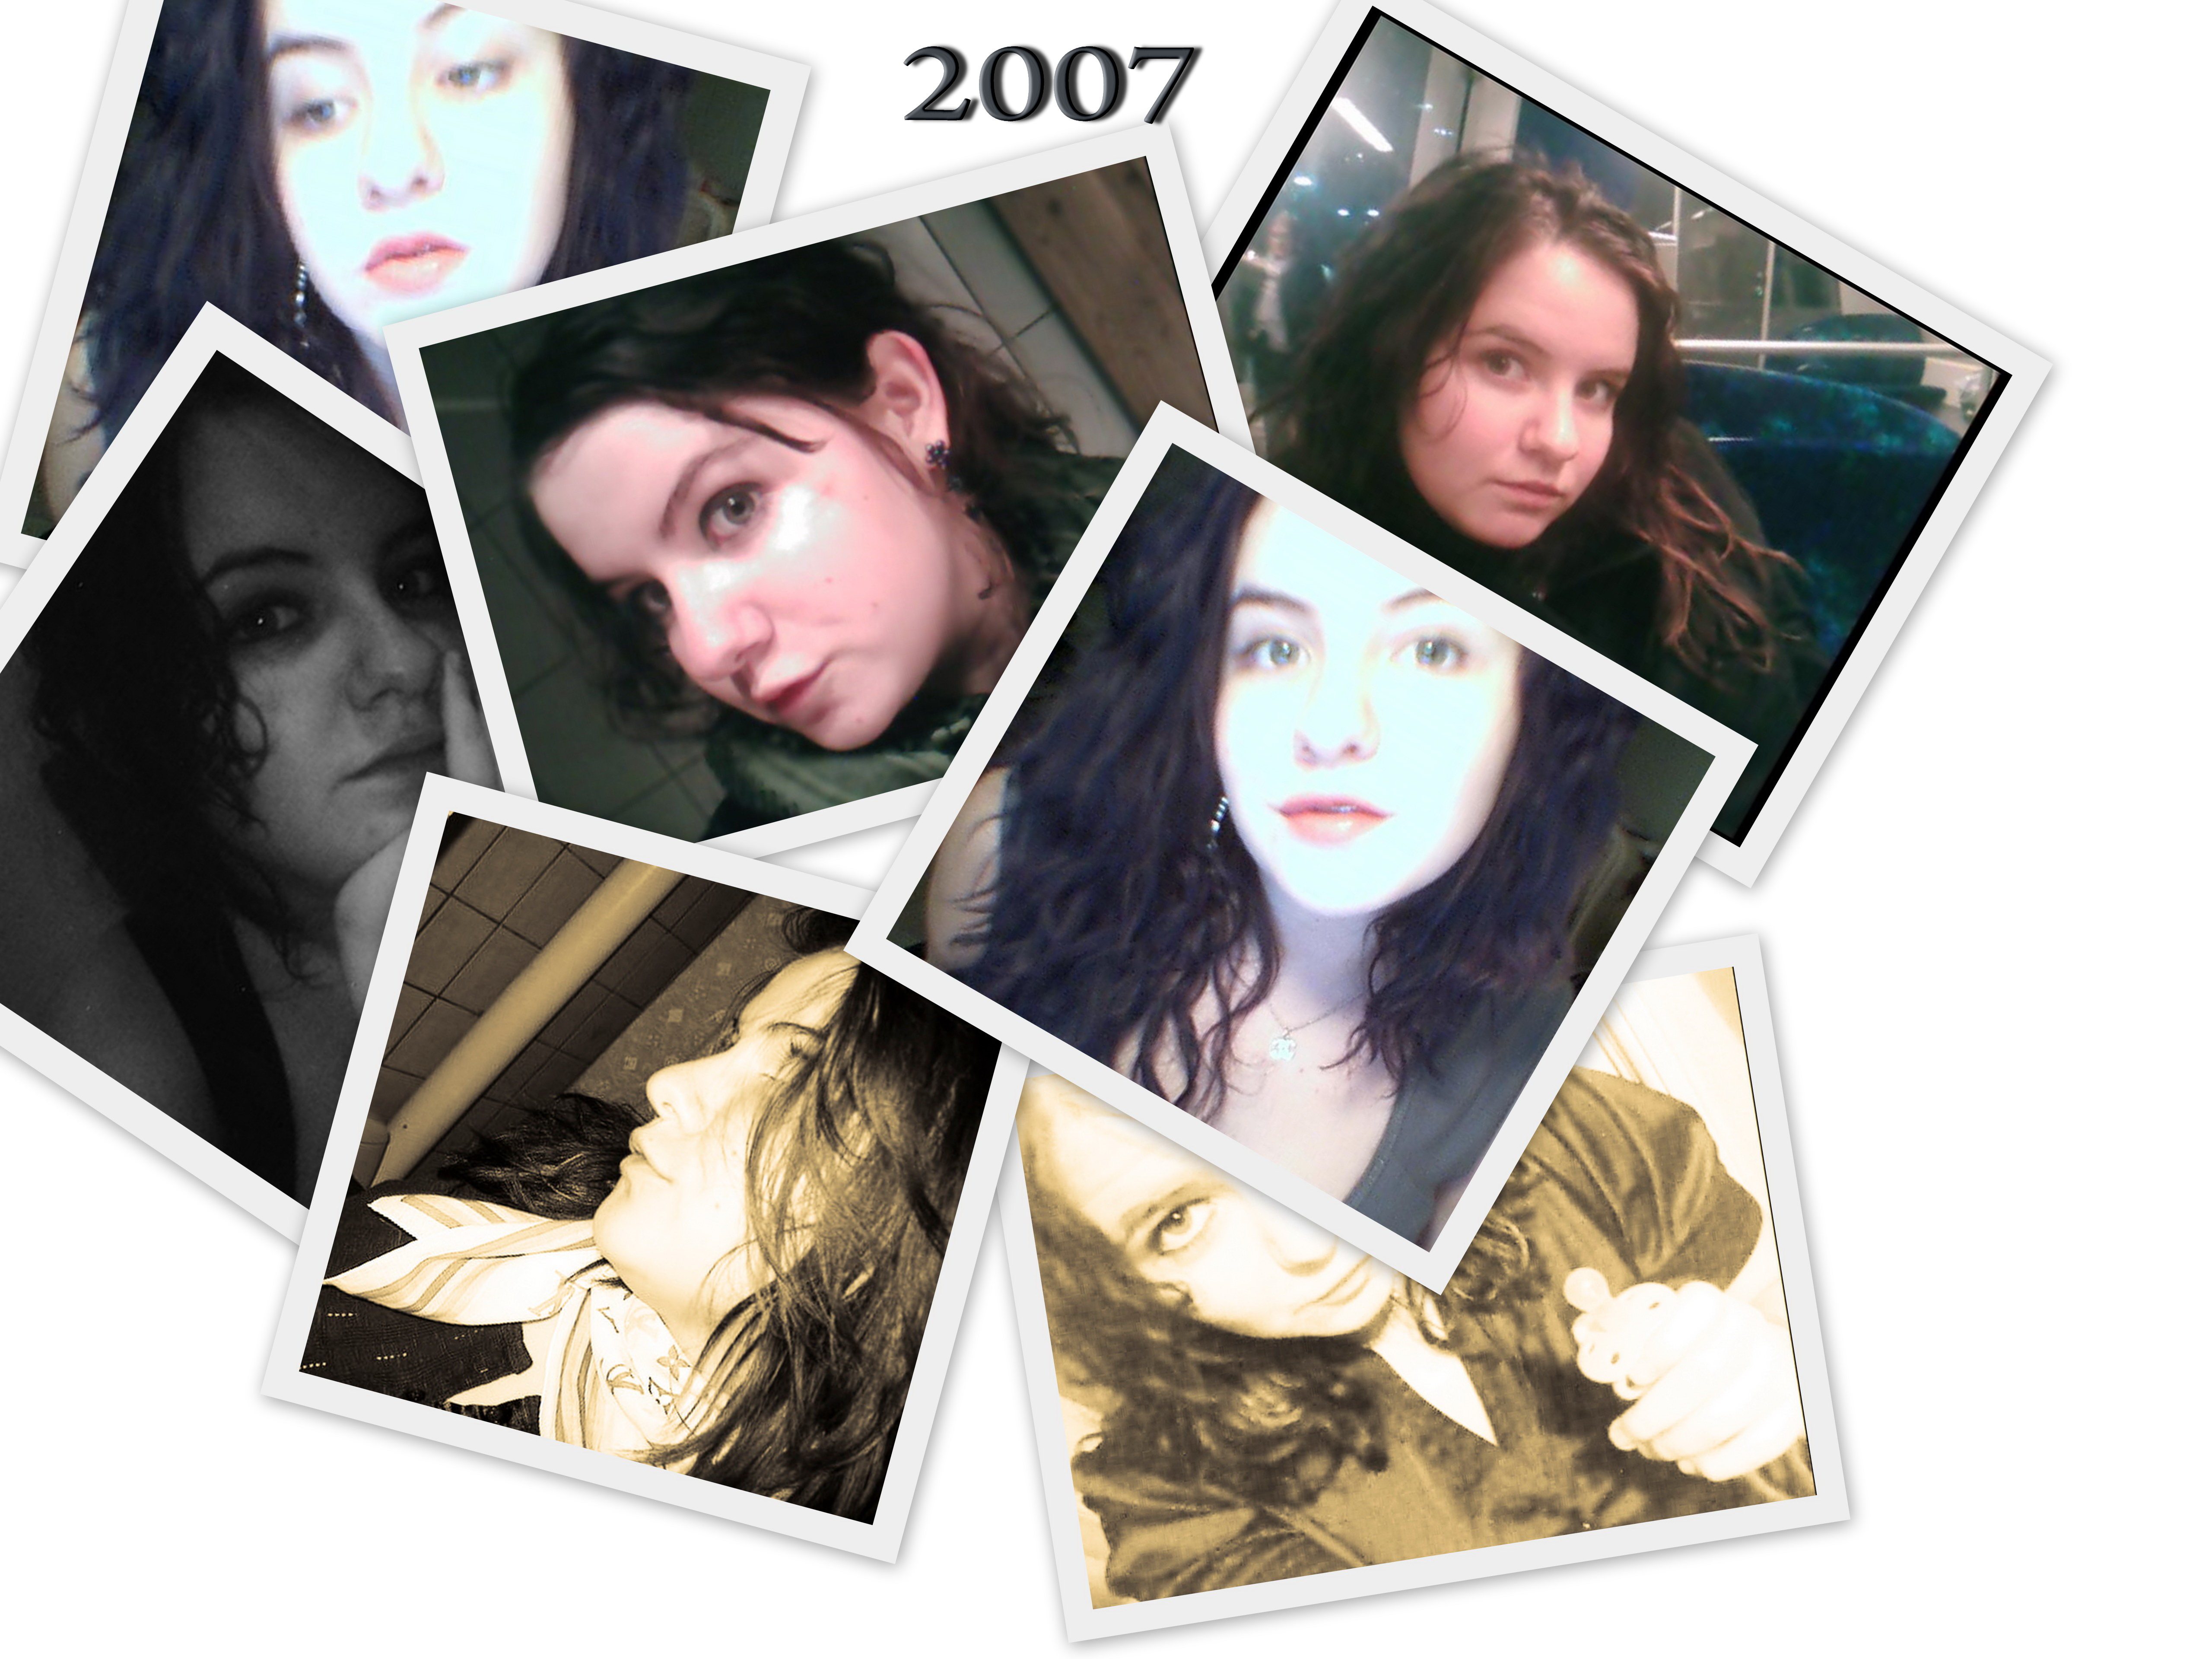 photo collage of leah salazar from 2007